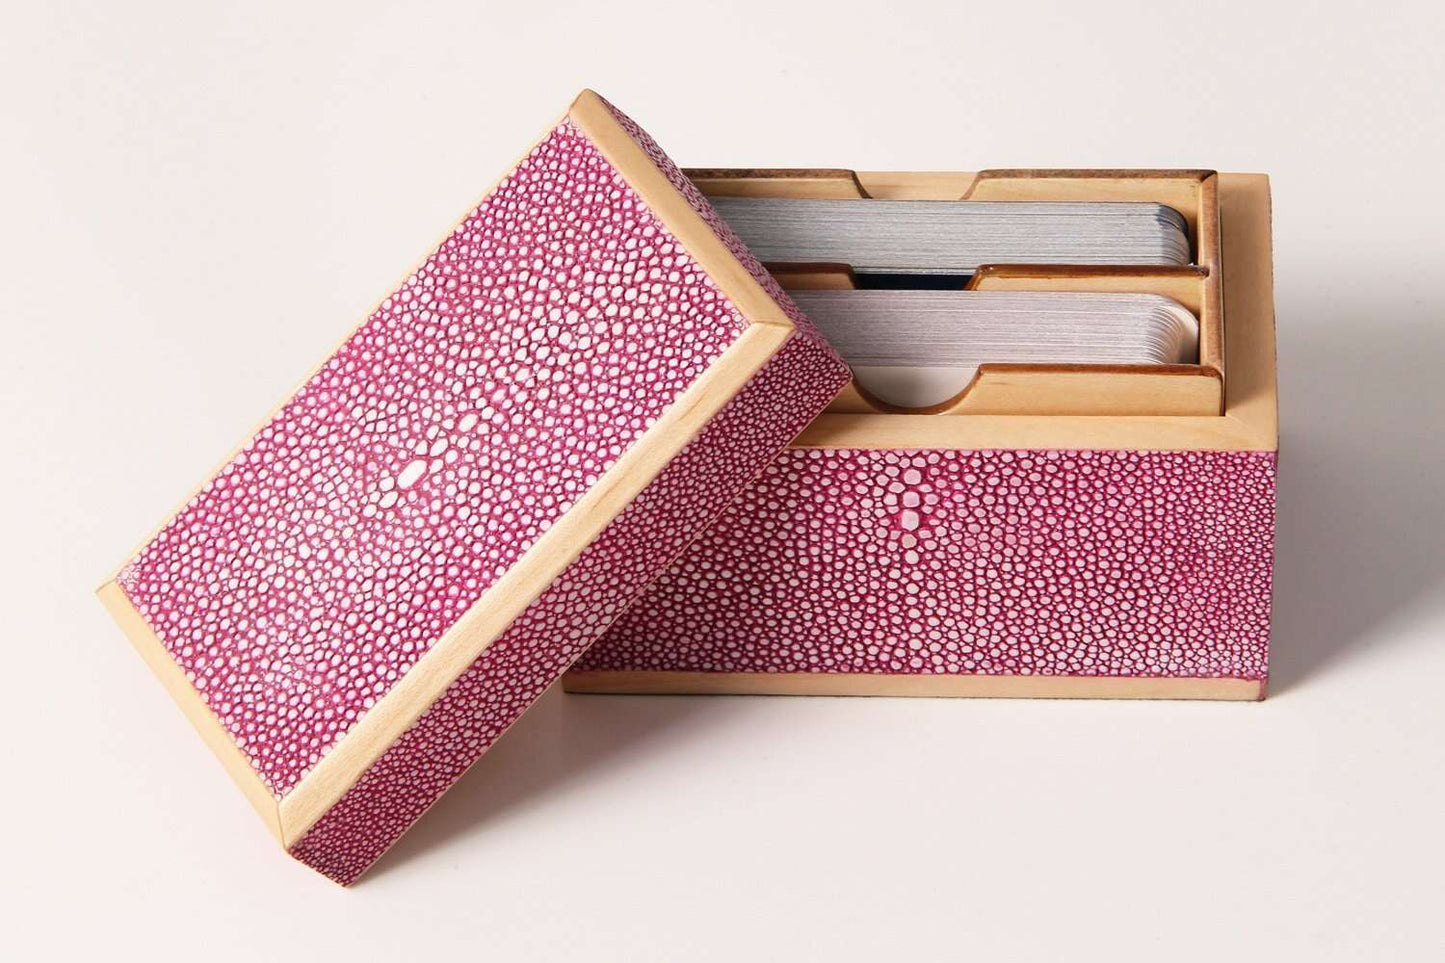 Playing Card Box in Pink Shagreen